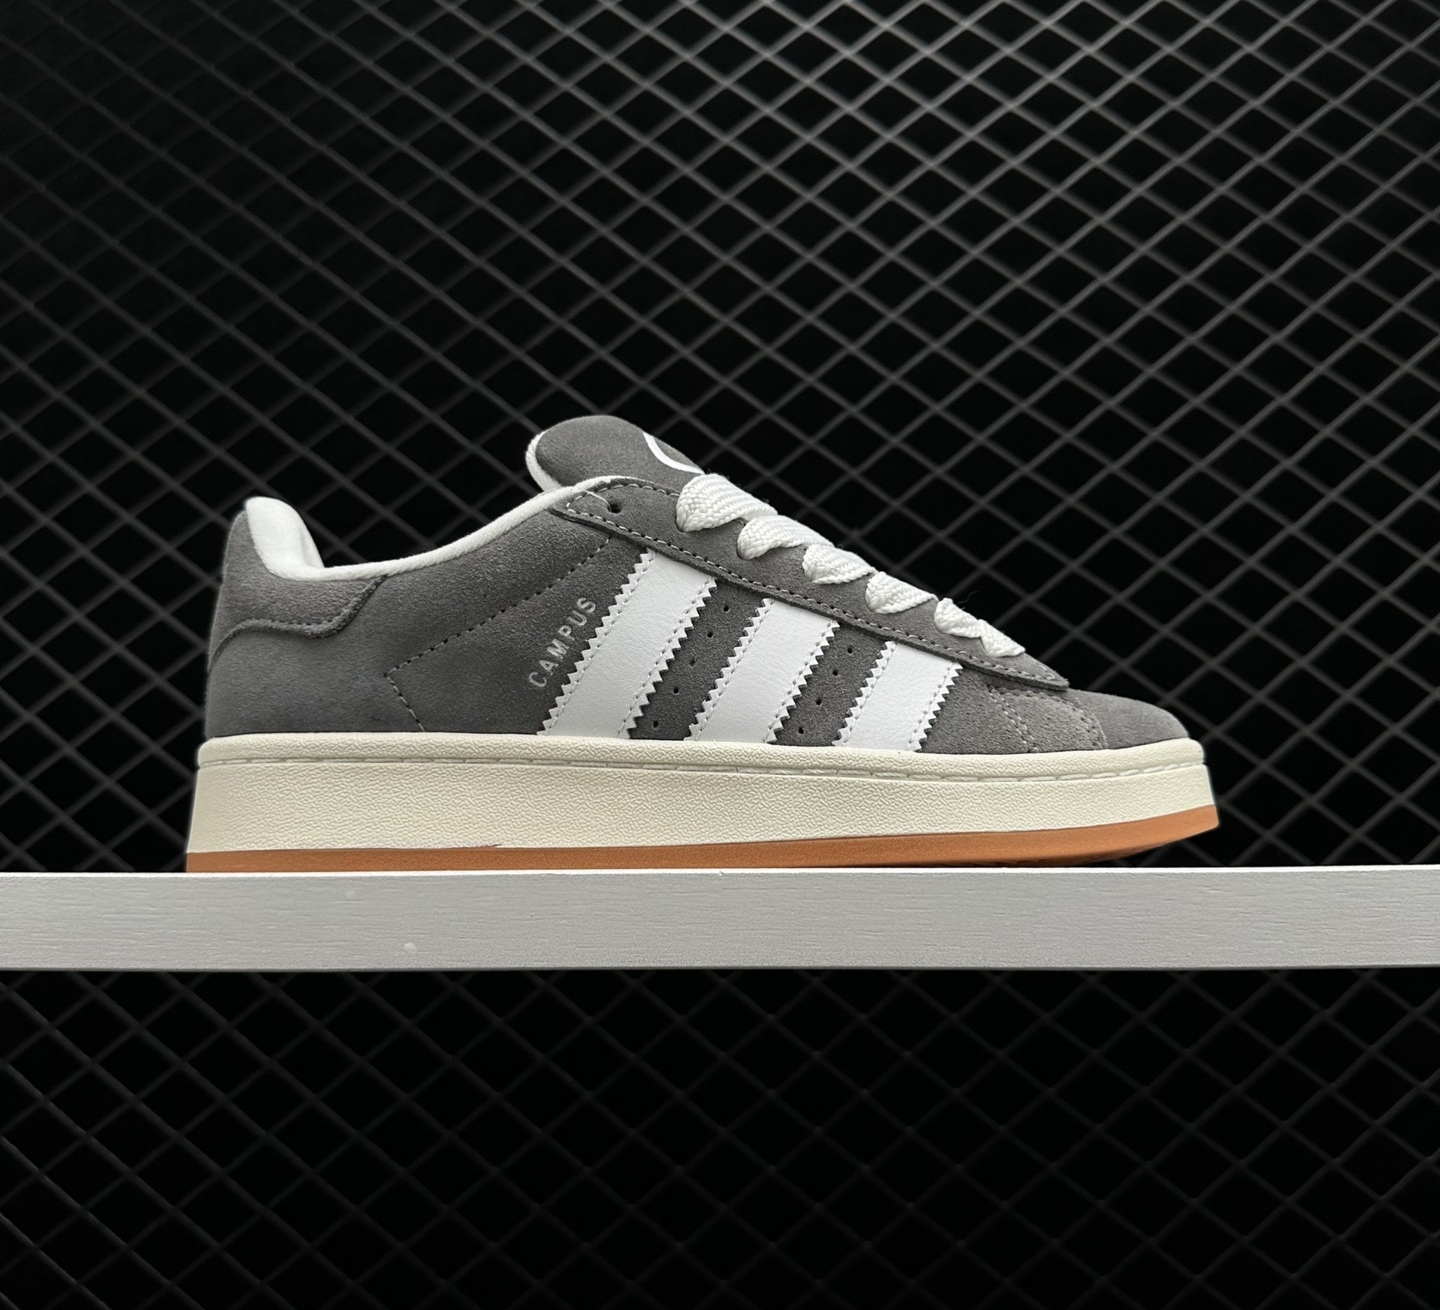 Adidas Campus 00s Grey White - Stylish Sneakers with Iconic Design